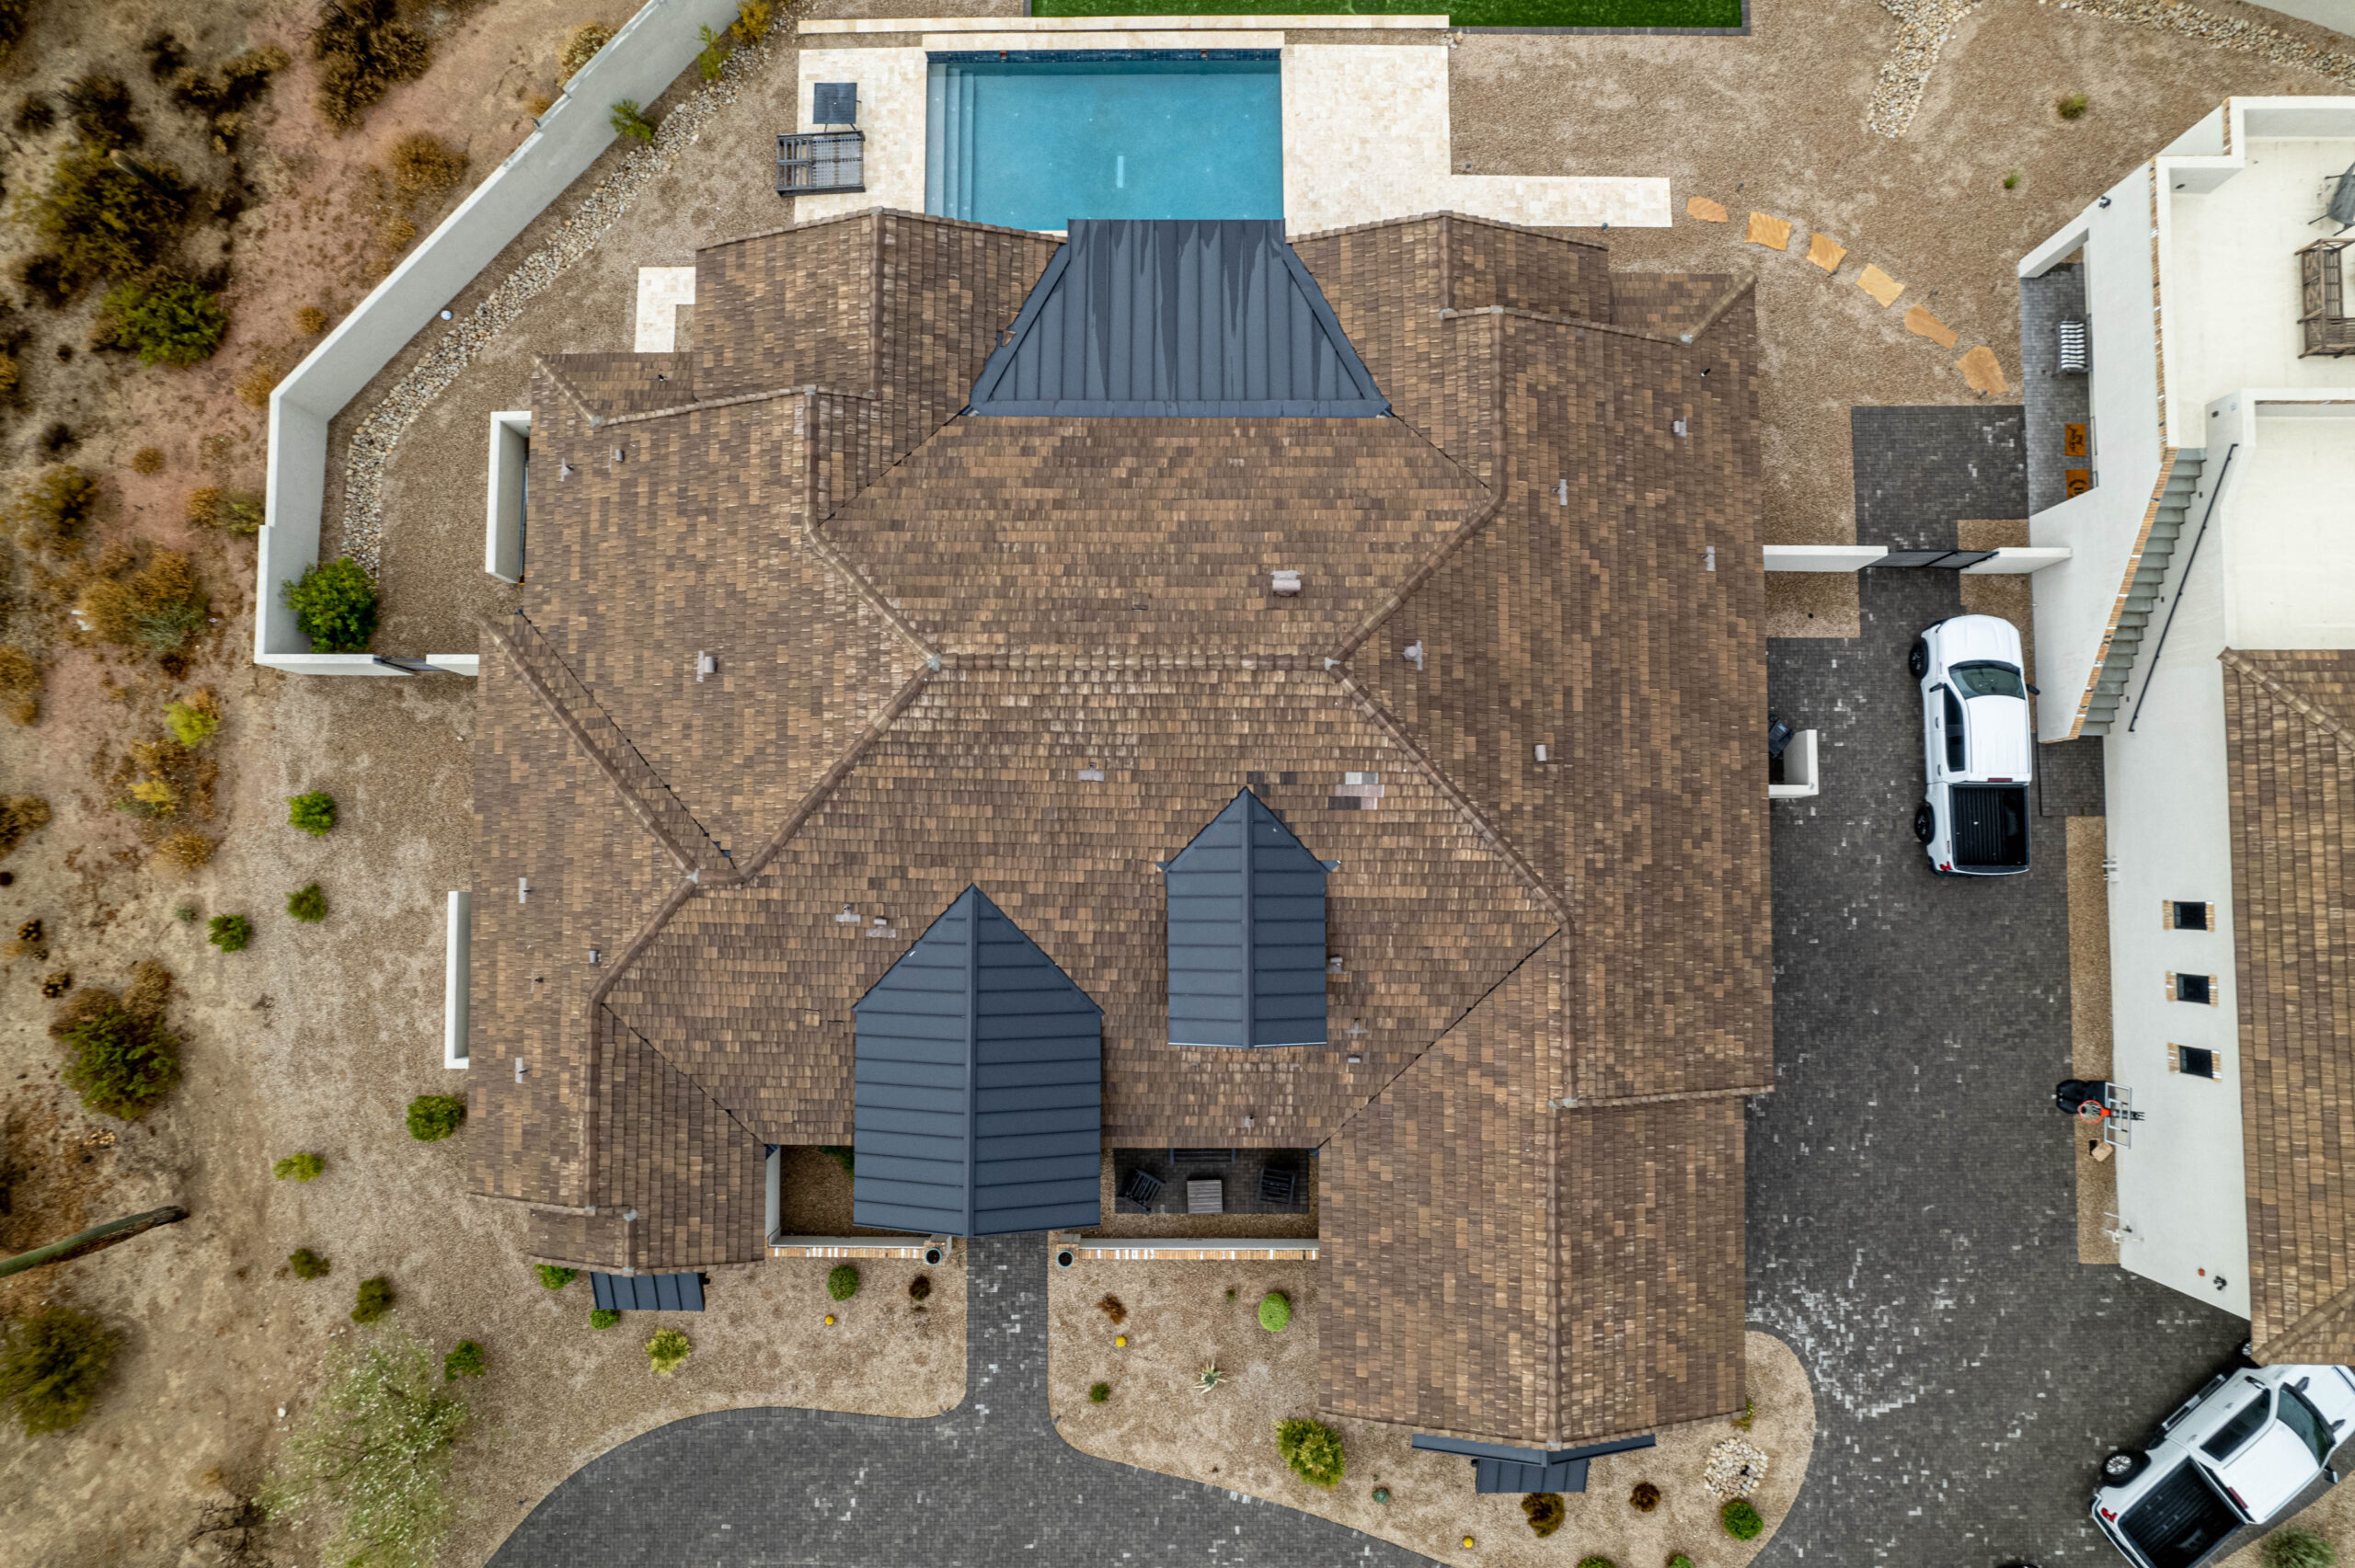 Aerial view of tile re-roofing project in Chandler by Behmer Roofing & Sheet Metal.